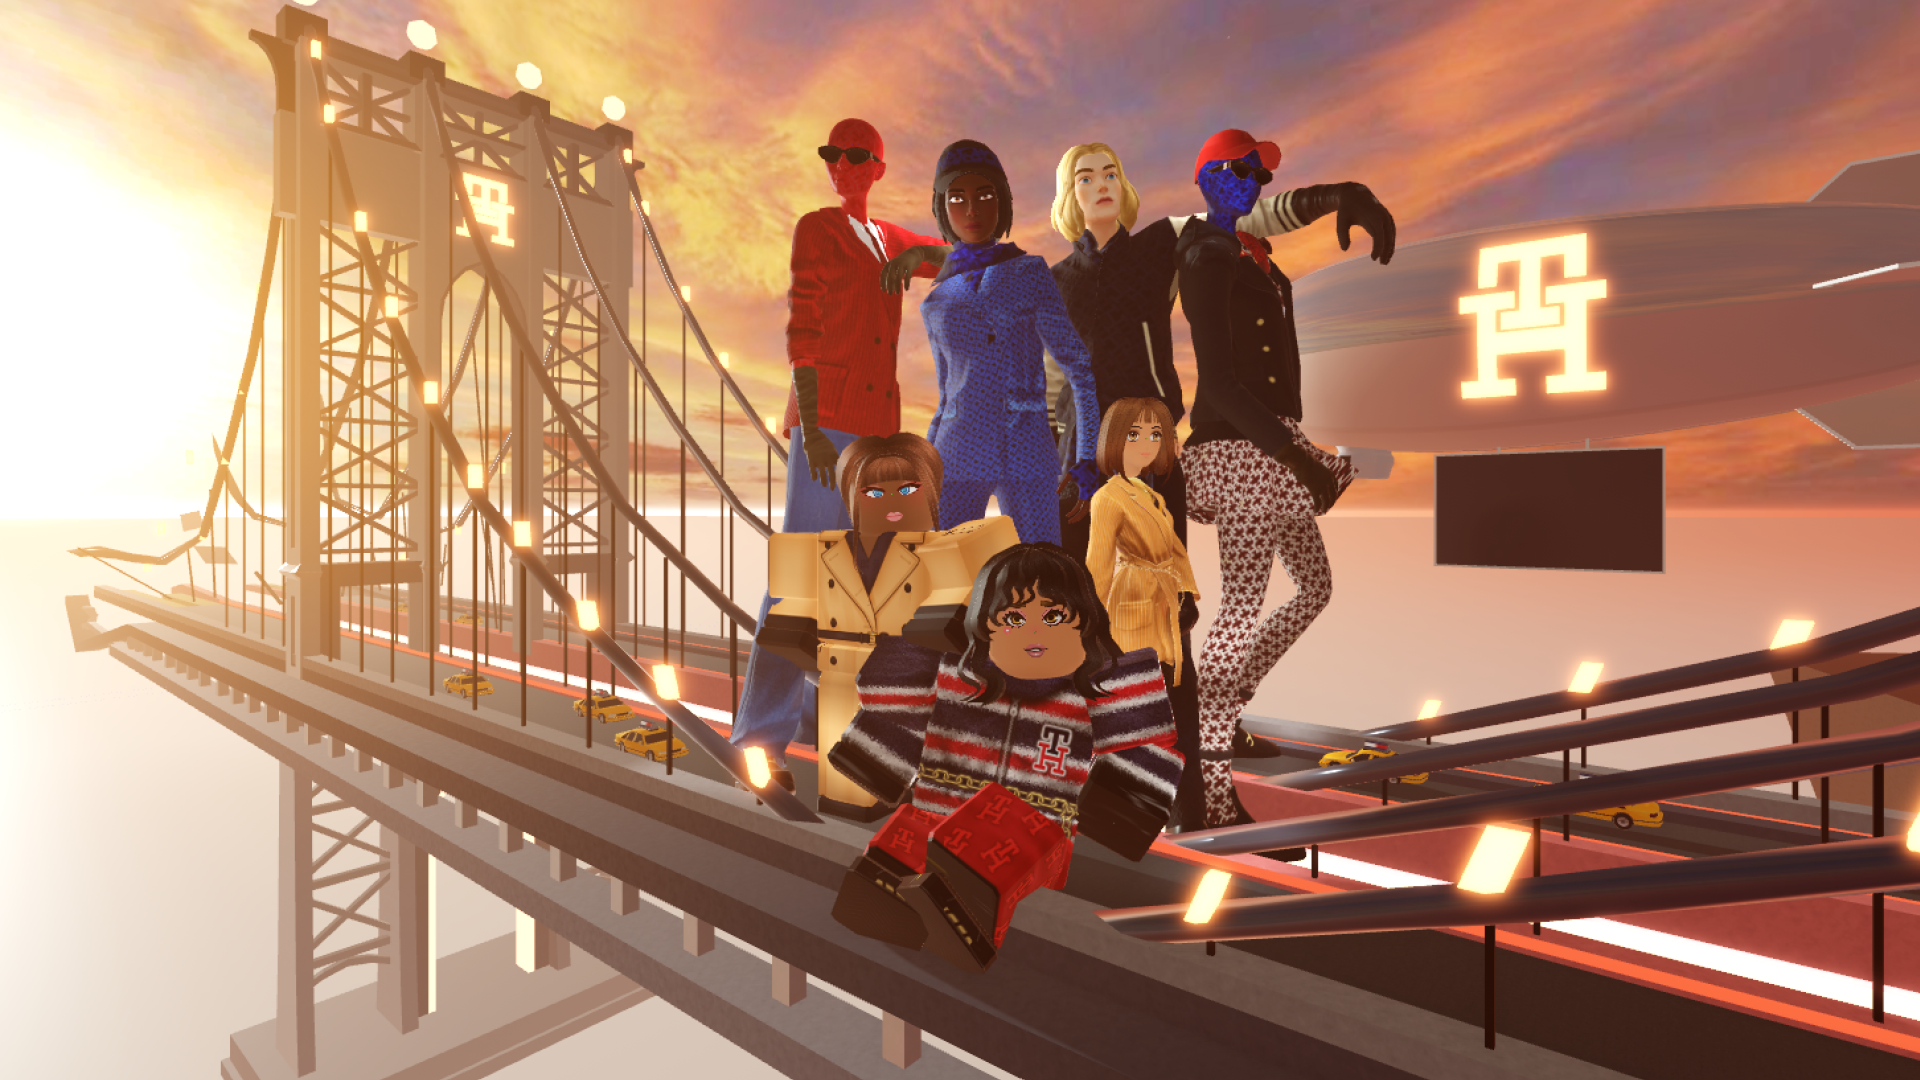 Gen Z Fuels Fashion And Brands In The Metaverse, Latest Roblox Survey Shows